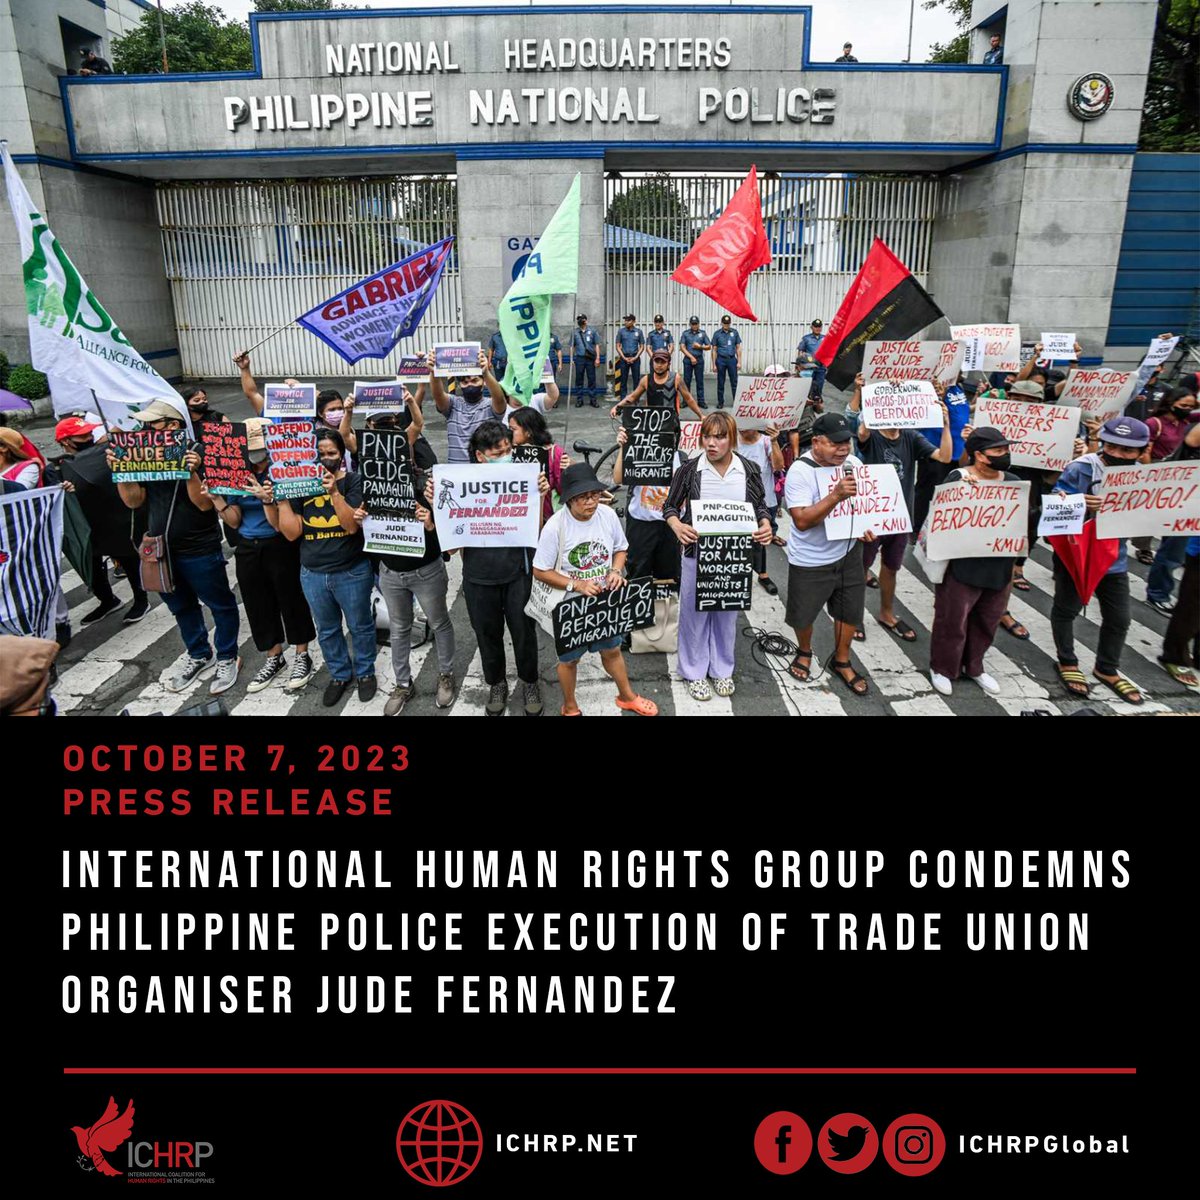 “ICHRP calls on the global community to join in condemning the ongoing slaughter of trade unionists and other human rights defenders in the Philippines, to work to end the brazen impunity of the Philippine government armed security forces.' Read: ichrp.net/6hOK